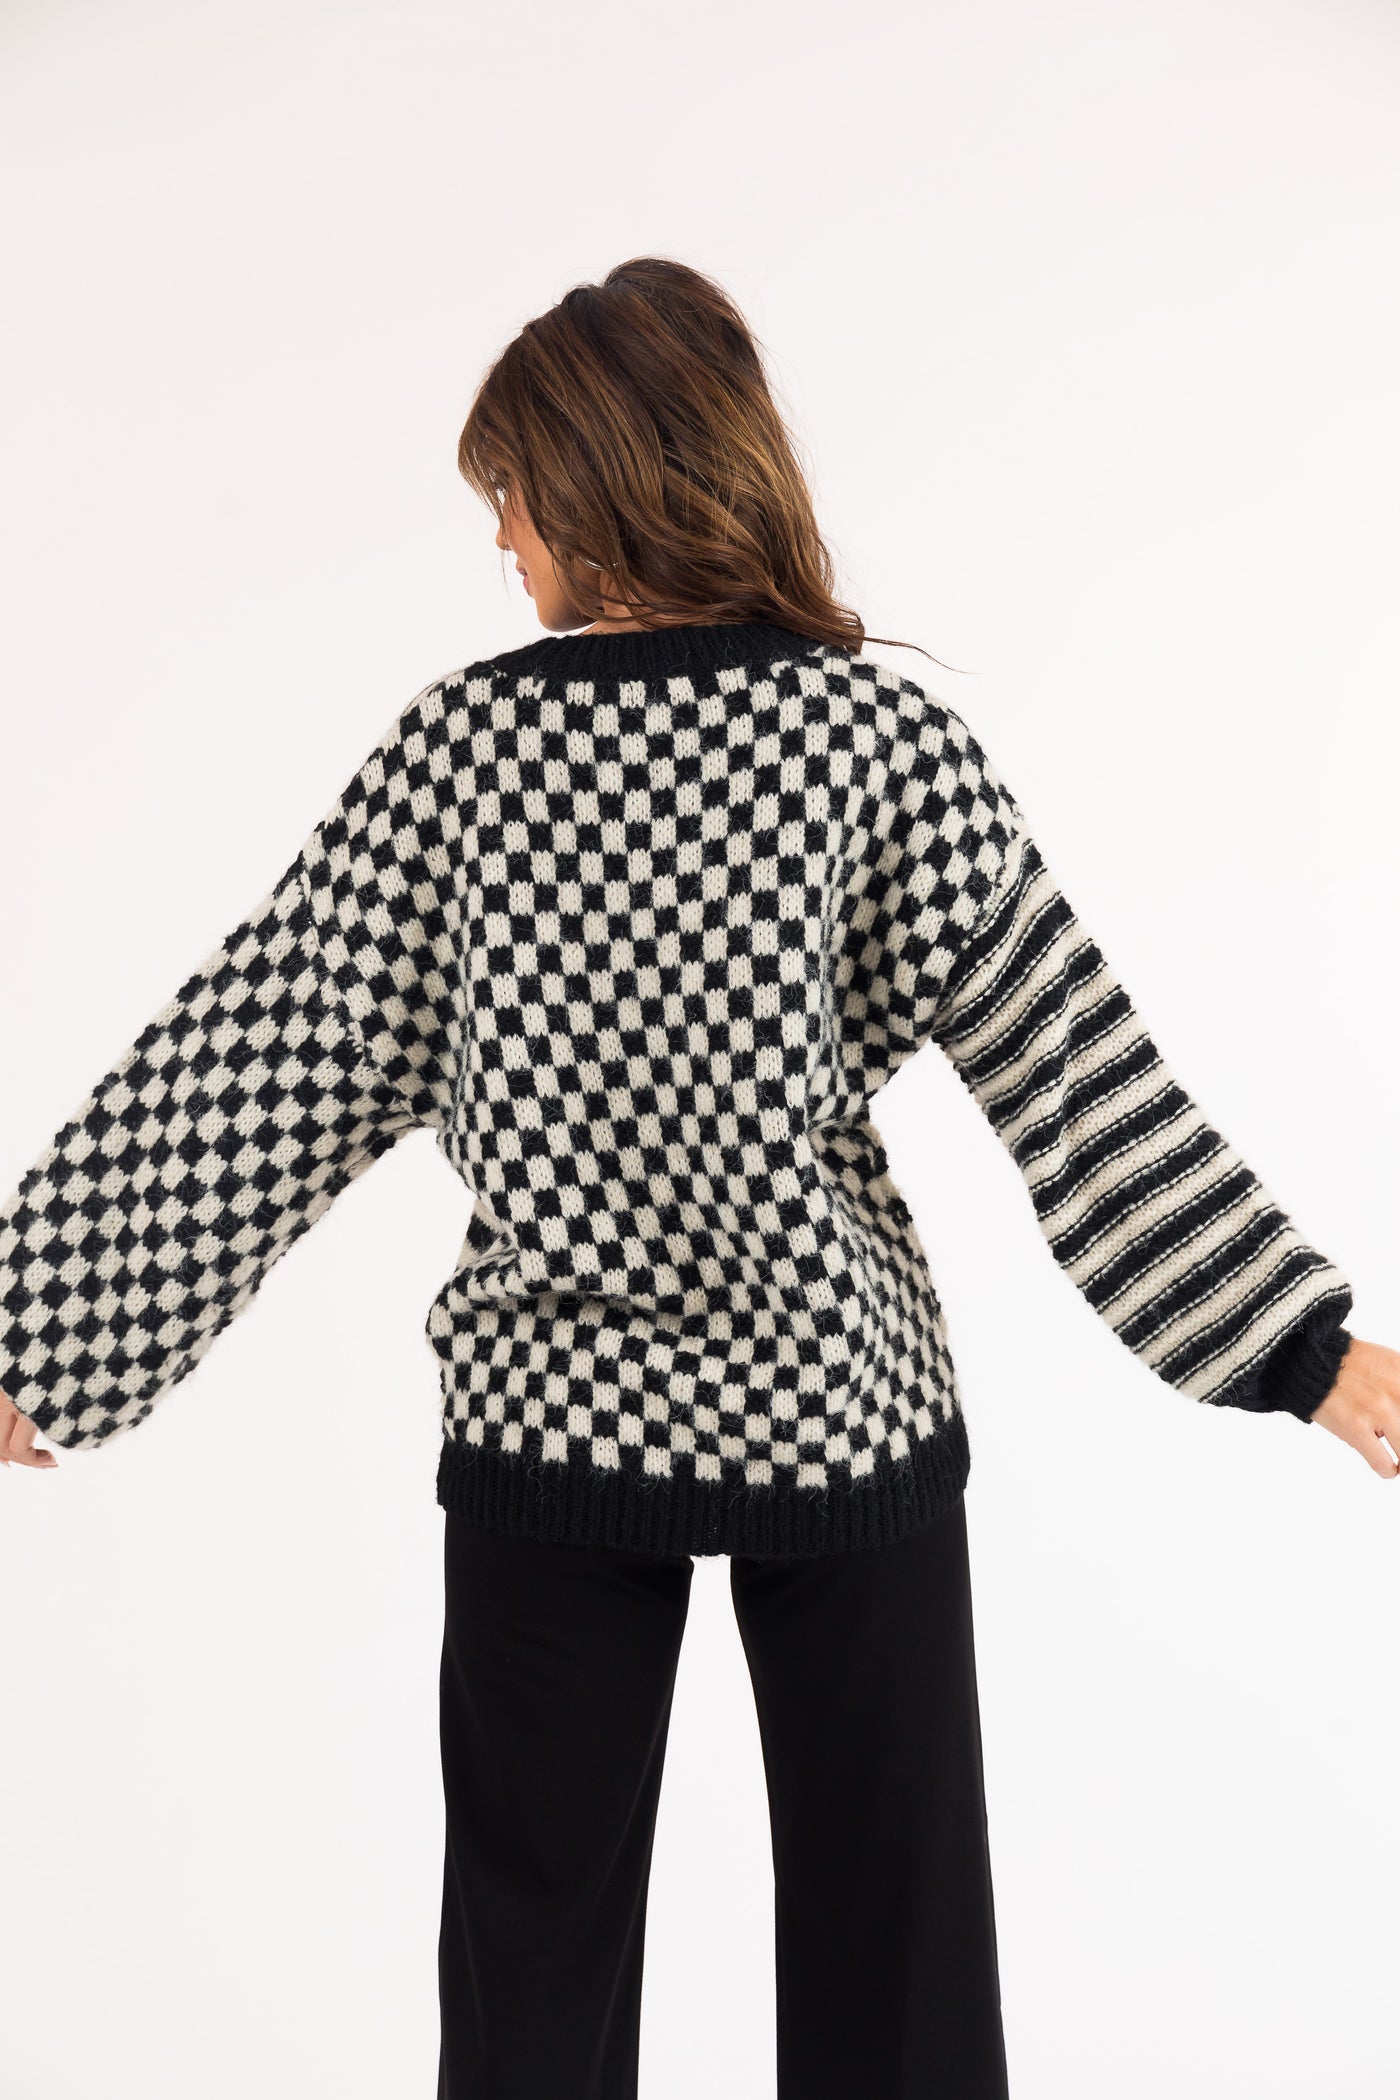 Black Checkered and Striped Fuzzy Knit Sweater